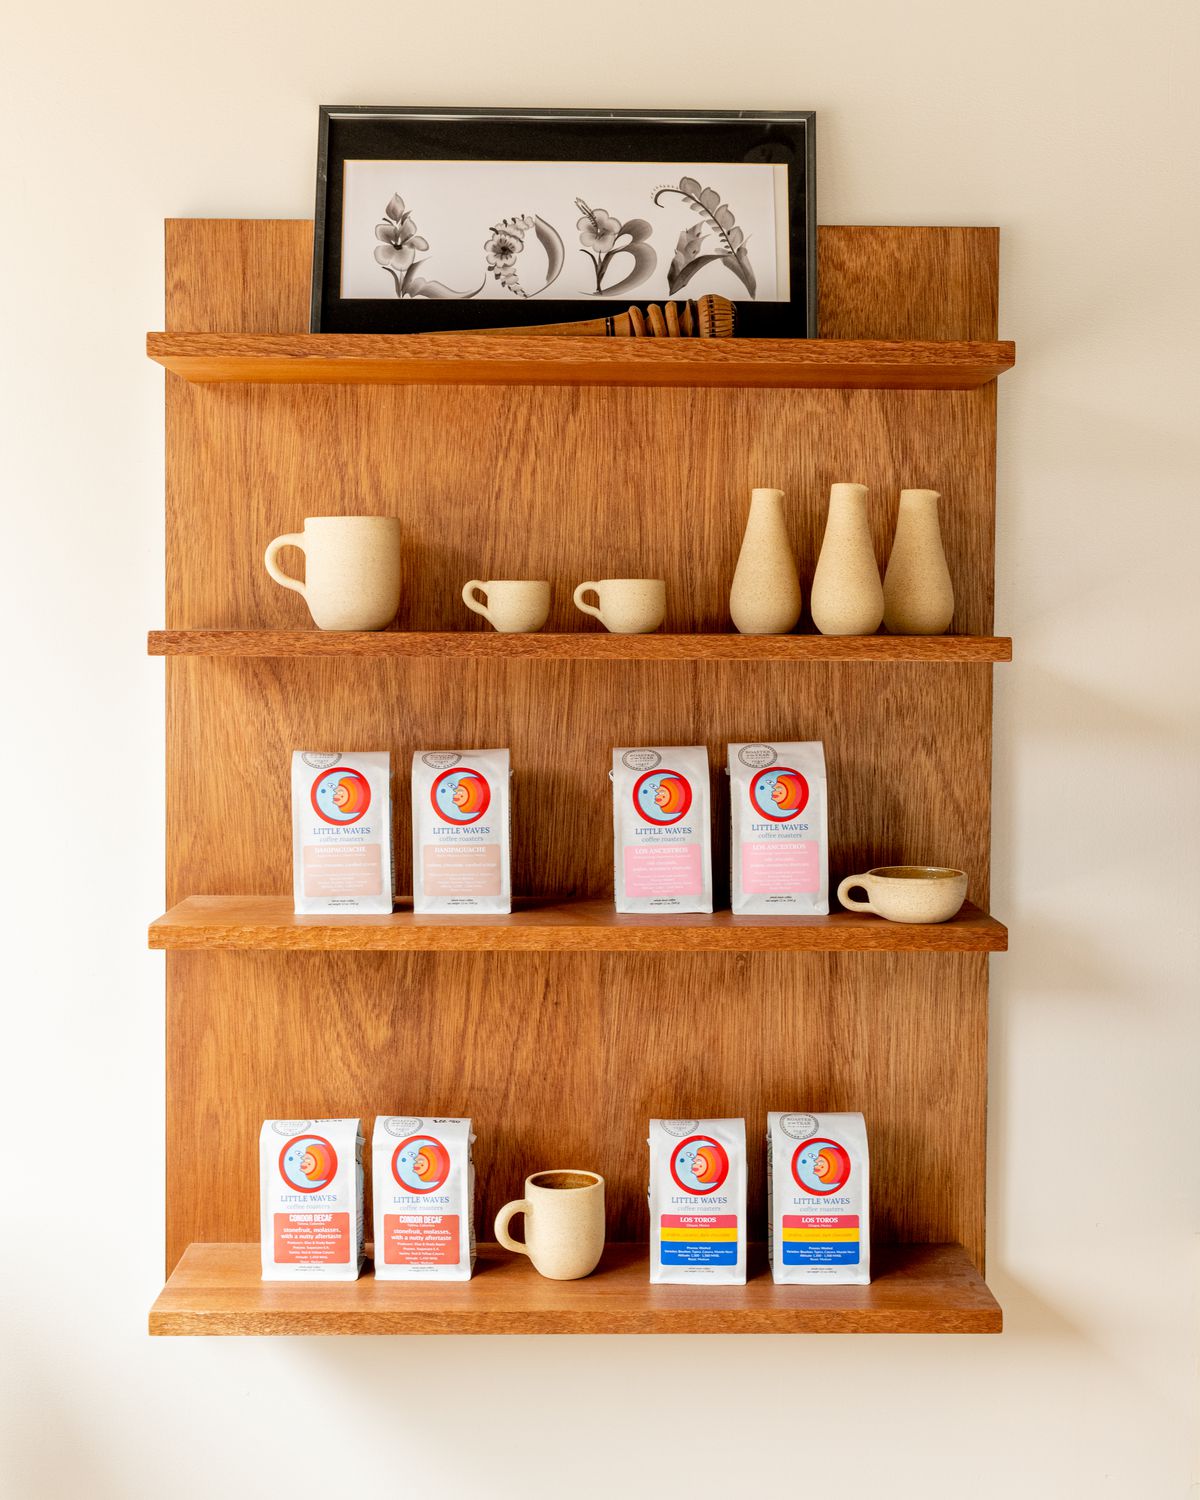 A wooden shelf unit holds bags of coffee beans and earthenware pottery.